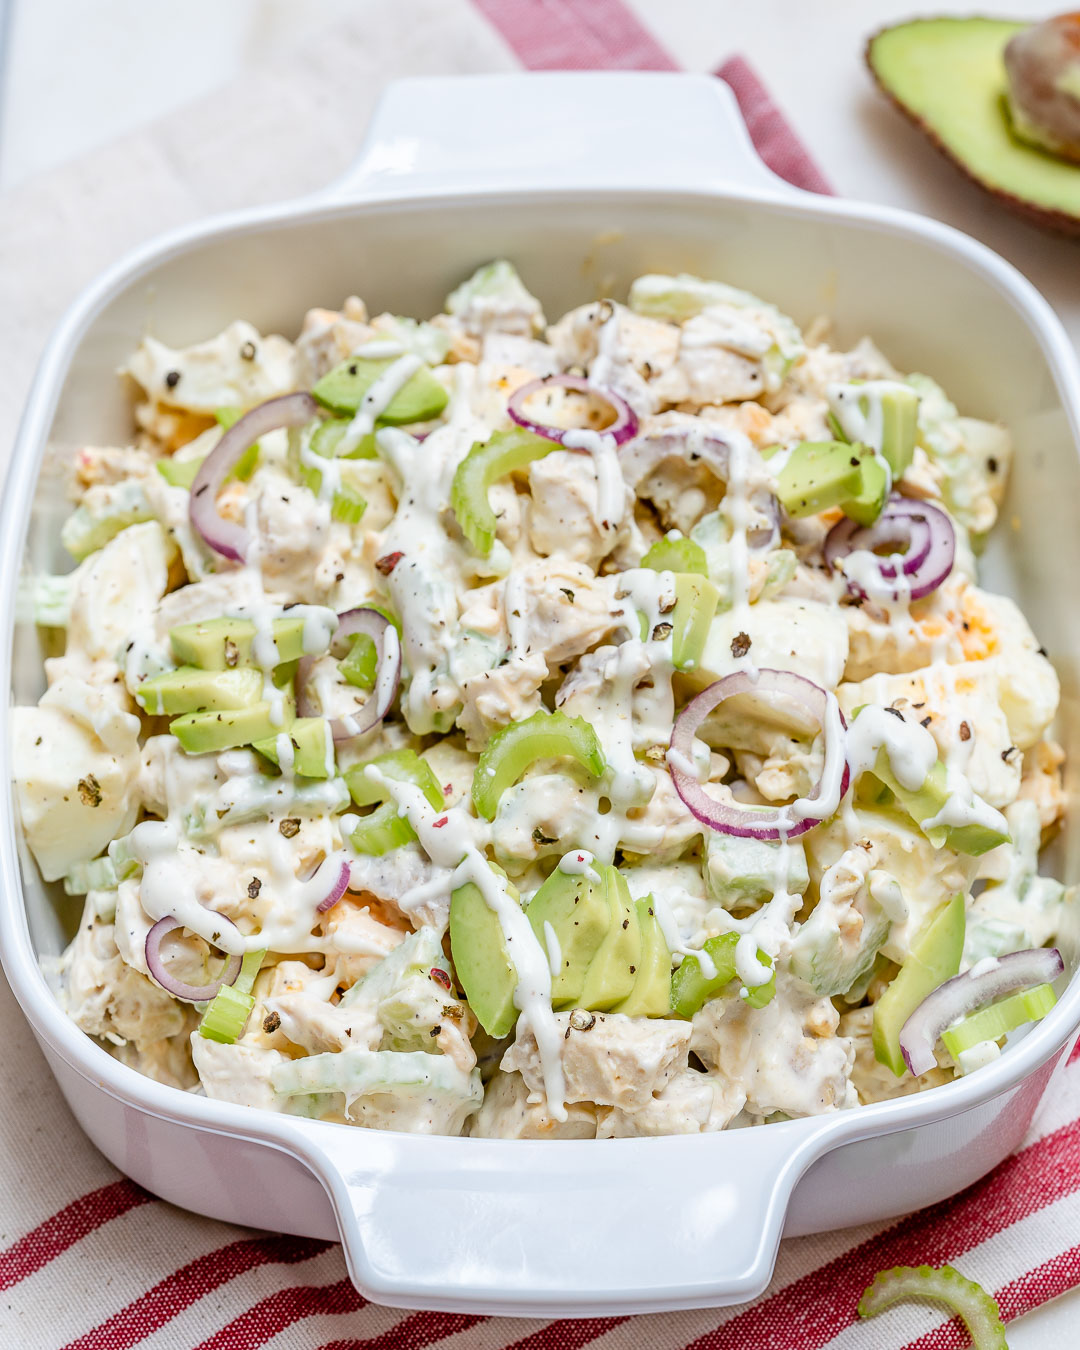 Super Fast and Easy Chicken Avocado Egg Salad for Eating Clean